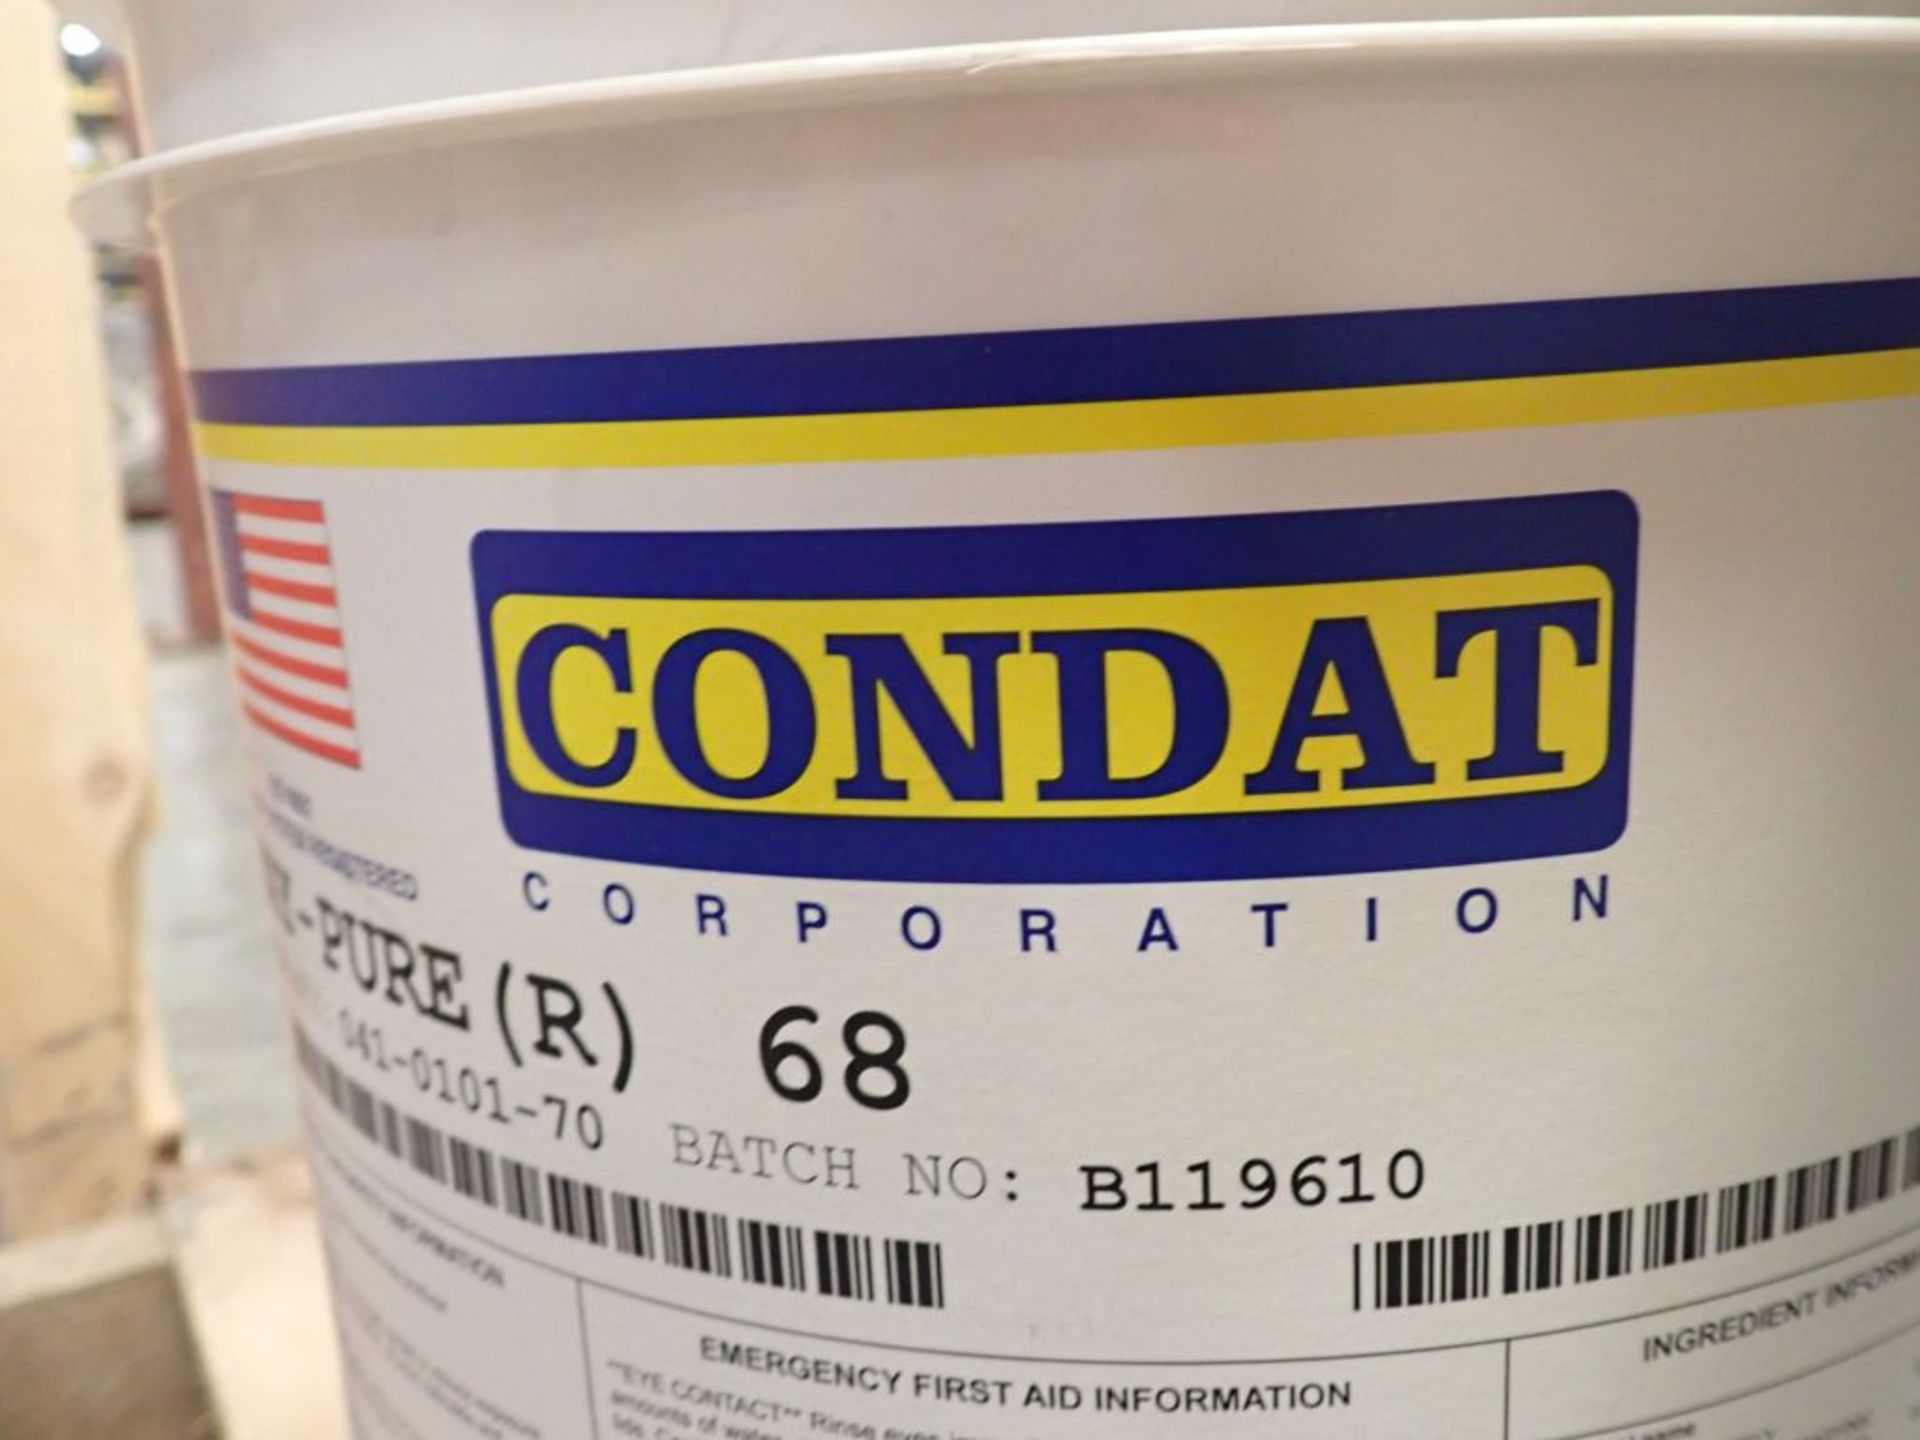 Lot of (4) Containers of 5-Gallon Condat Wire Lubricant | Item Key: 041-0191-70; New Surplus - Image 6 of 12